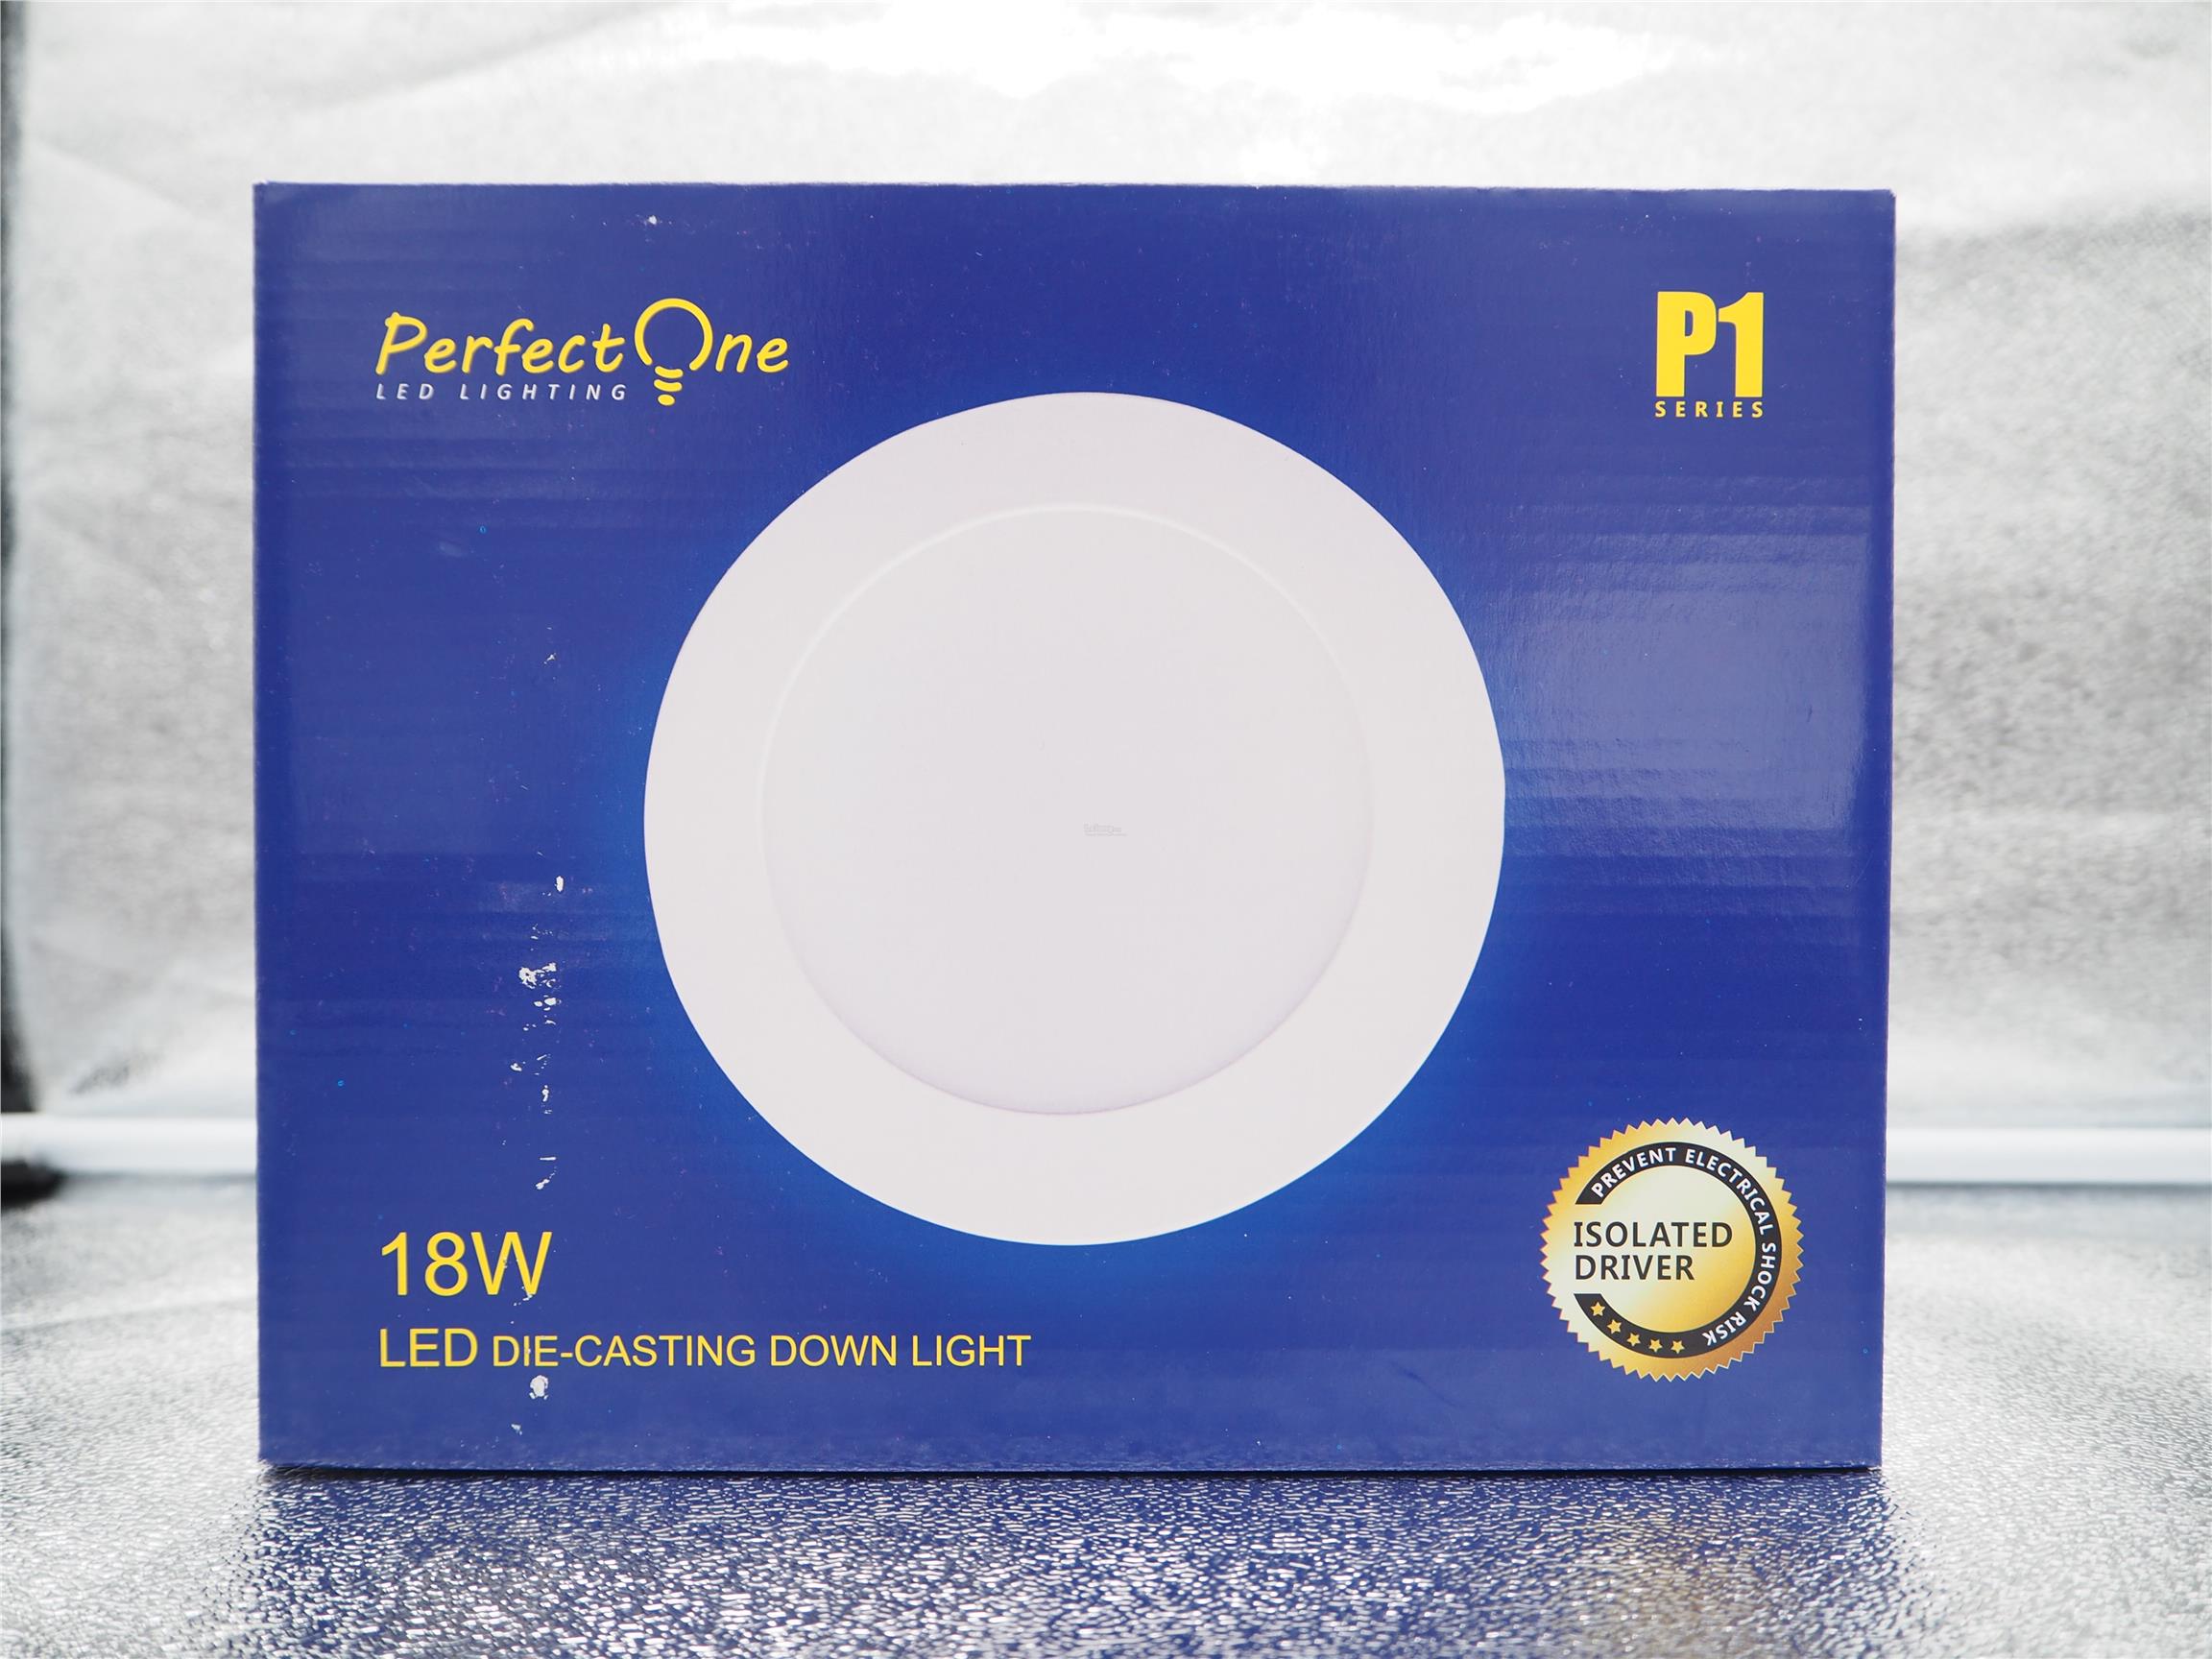 PERFECT ONE LED LIGHTING 18W LED DIE-CASTING DOWN LIGHT